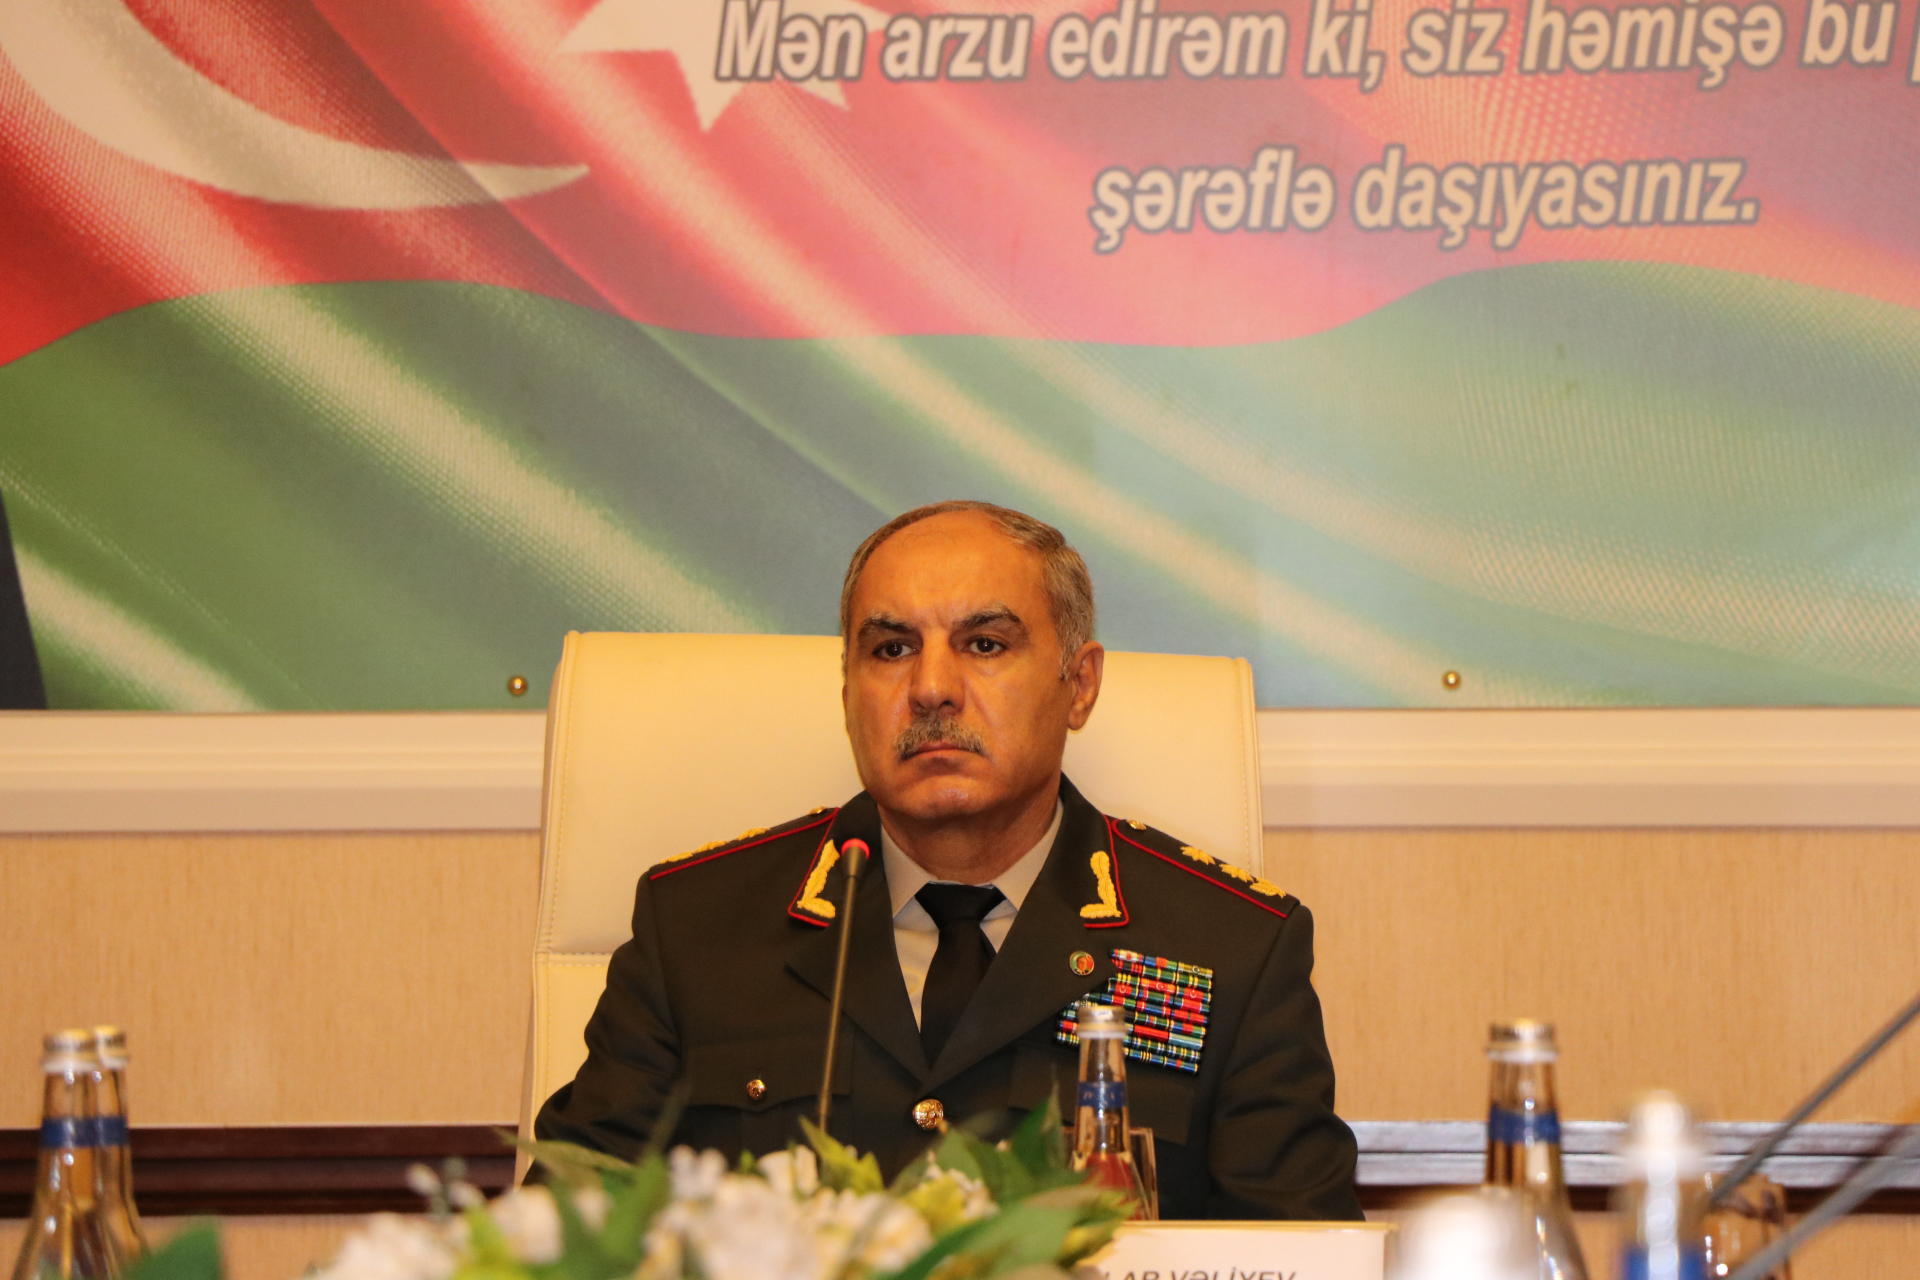 Azerbaijan initiates proceedings on crimes committed by separatists - Military Prosecutor